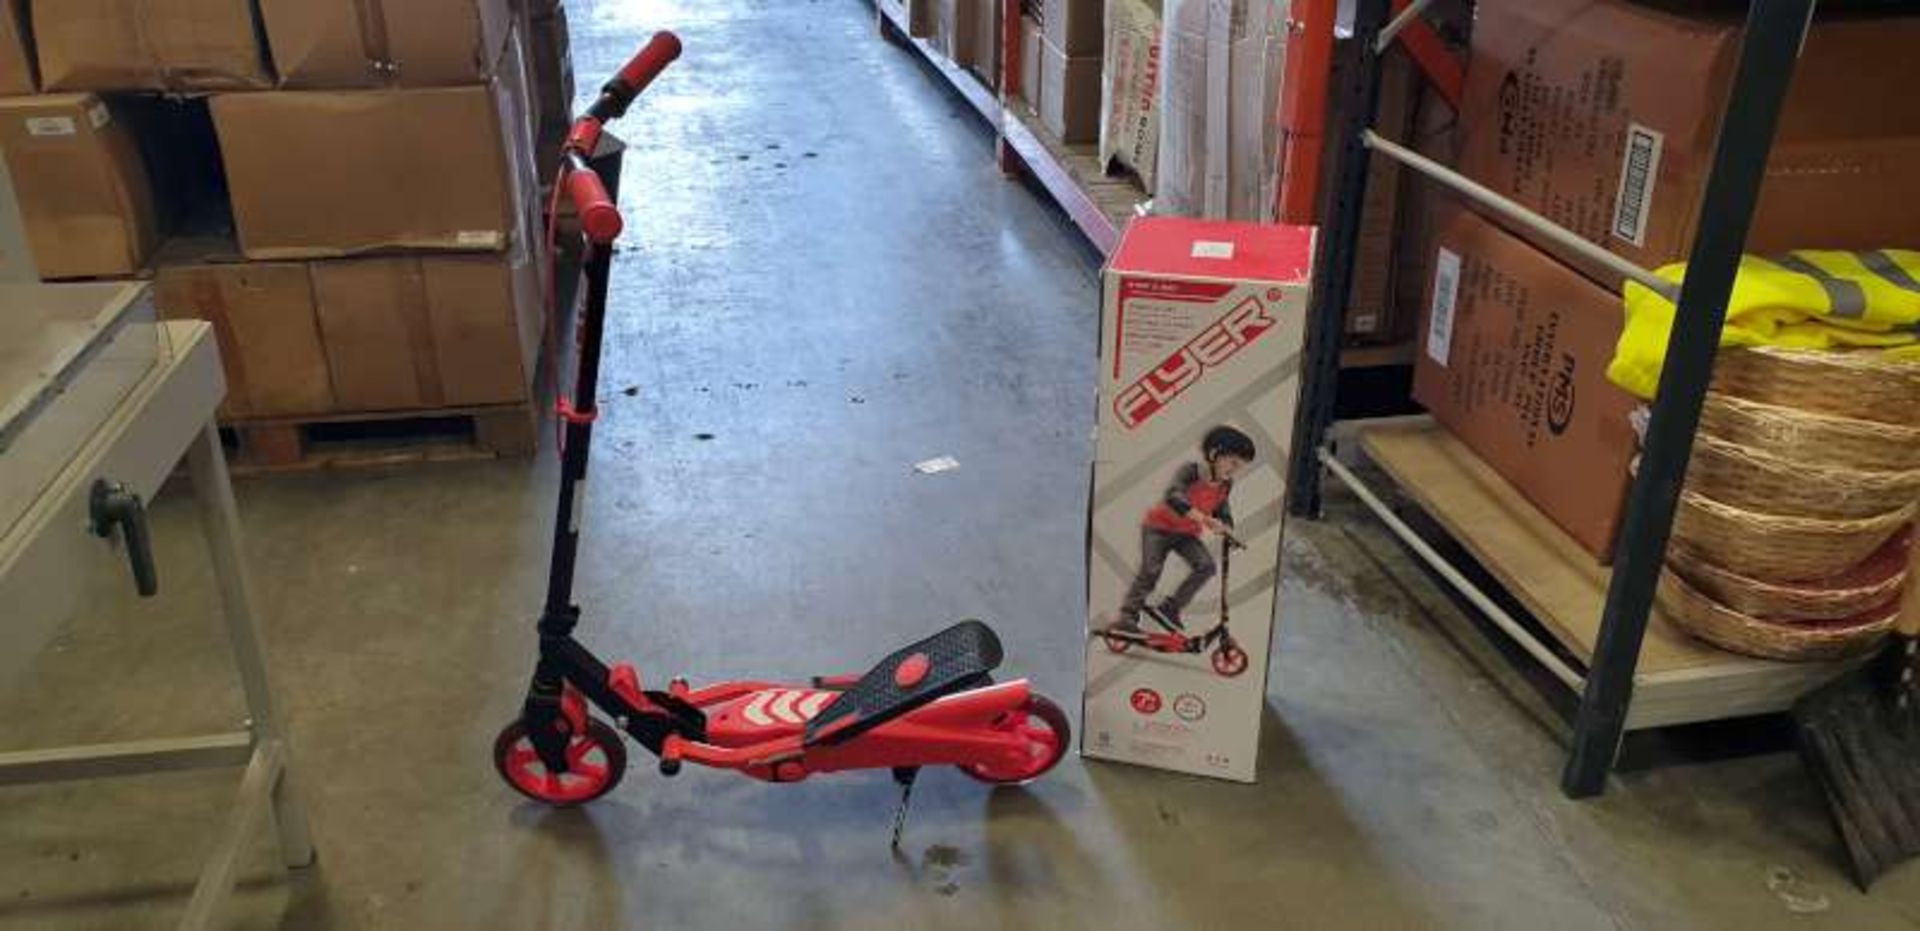 2 X BRAND NEW BOXED YVOLVE SPORTS FLYER SCOOTERS IN 1 BOX